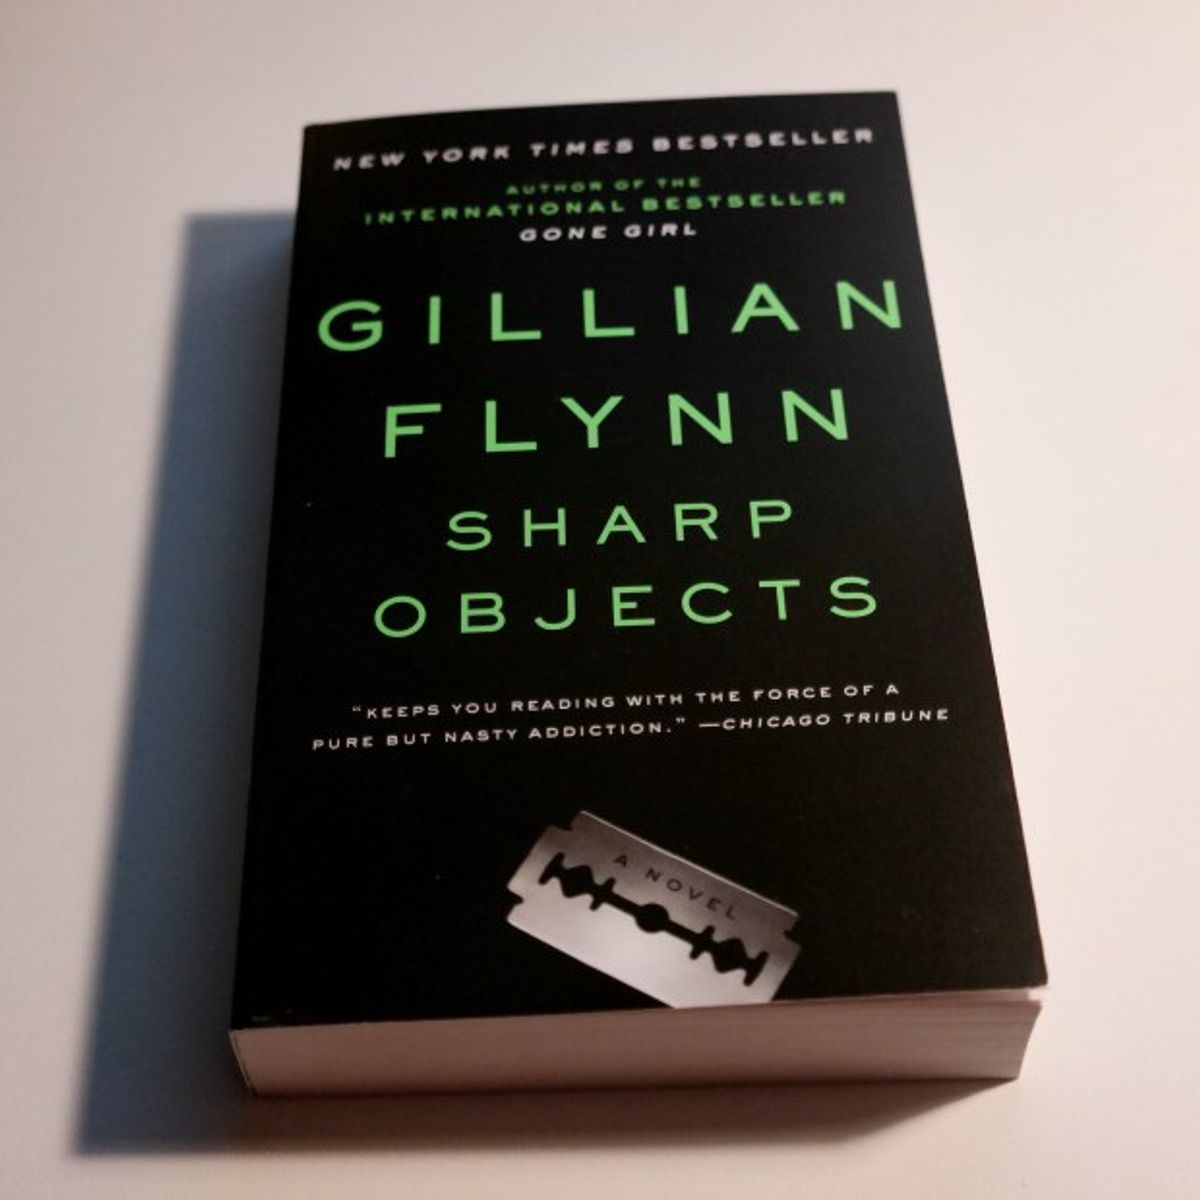 A Review Of Gillian Flynn's "Sharp Objects"